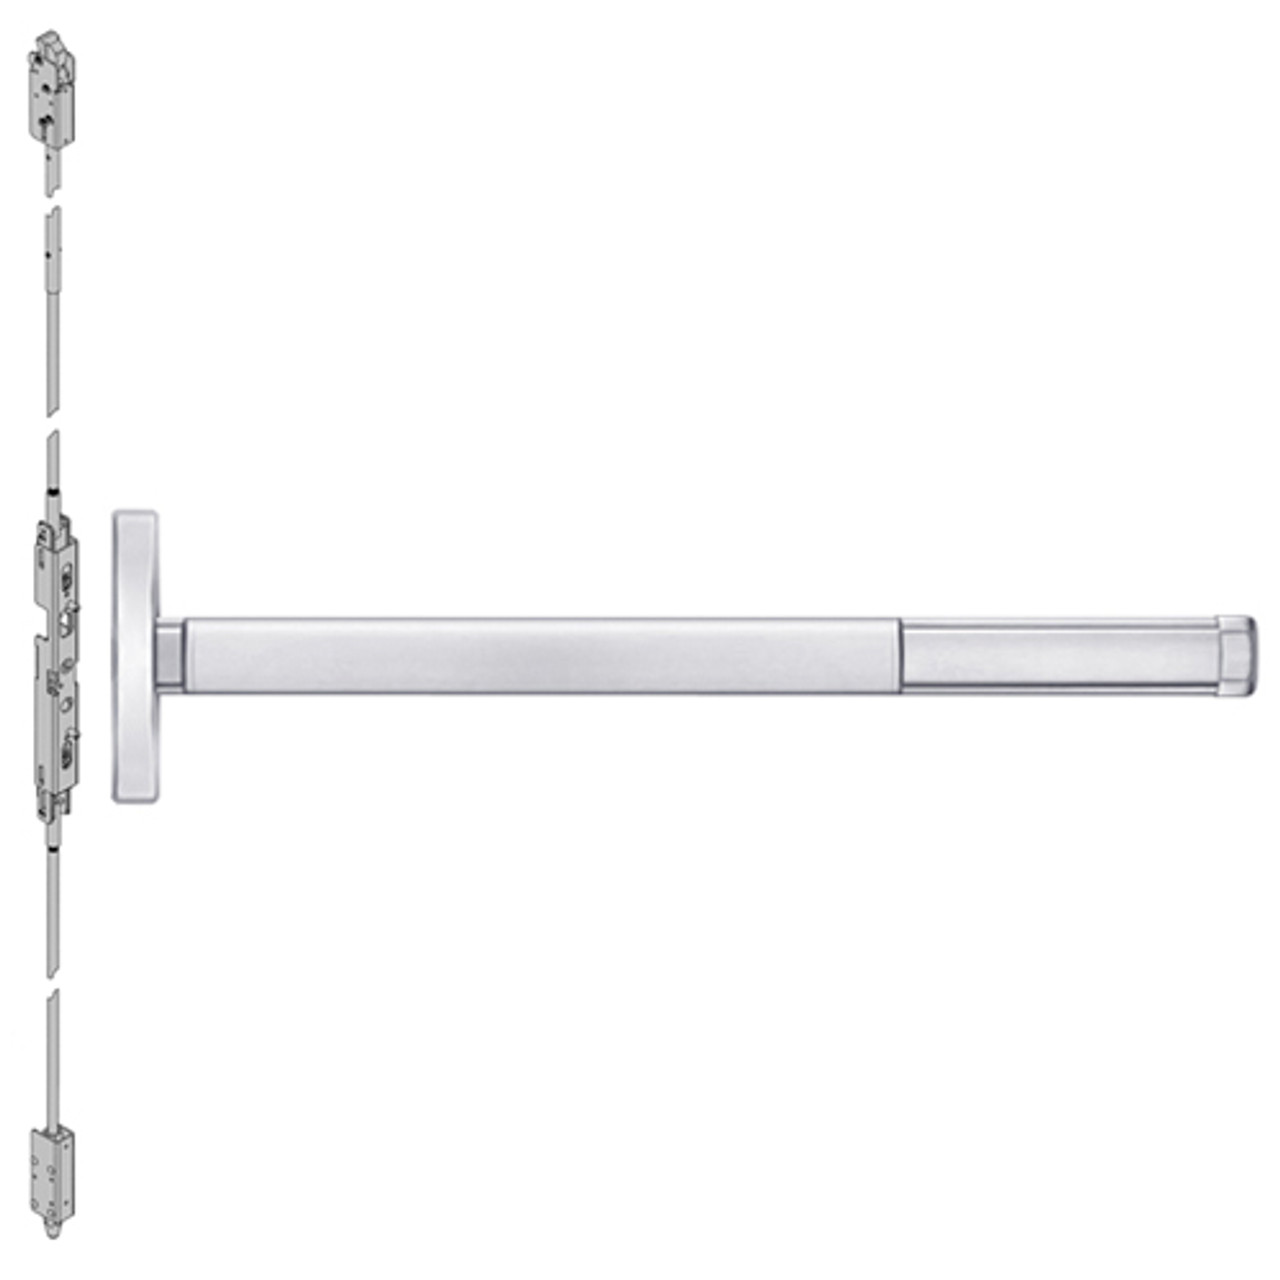 2601-625-36 PHI 2600 Series Non Fire Rated Concealed Vertical Rod Exit Device Prepped for Cover Plate in Bright Chrome Finish